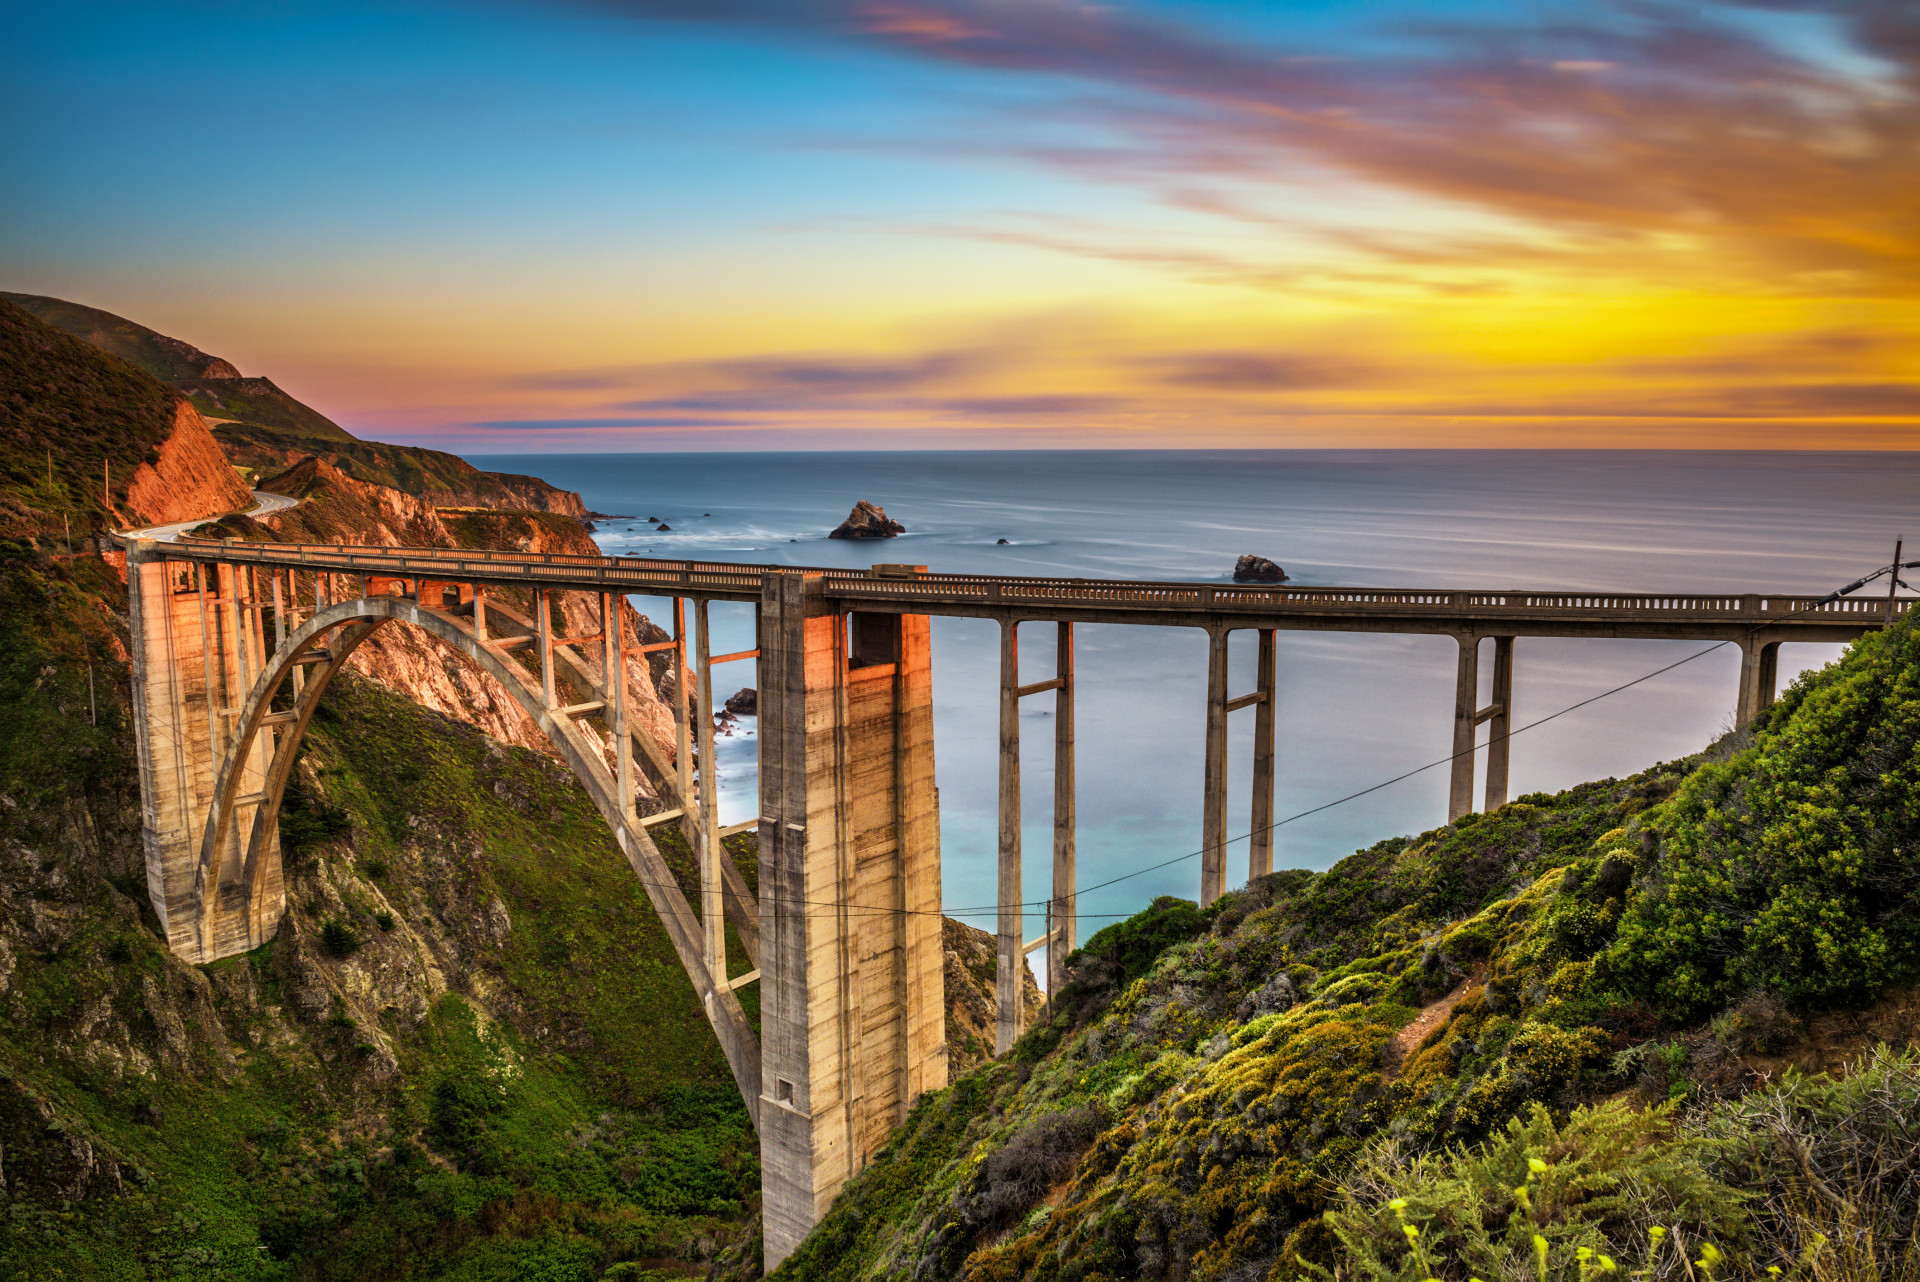 Going through Big Sur, you can stop at the Bixby Bridge for the perfect photo op.<p><a href="https://www.msn.com/en-us/community/channel/vid-7xx8mnucu55yw63we9va2gwr7uihbxwc68fxqp25x6tg4ftibpra?cvid=94631541bc0f4f89bfd59158d696ad7e">Follow us and access great exclusive content every day</a></p>